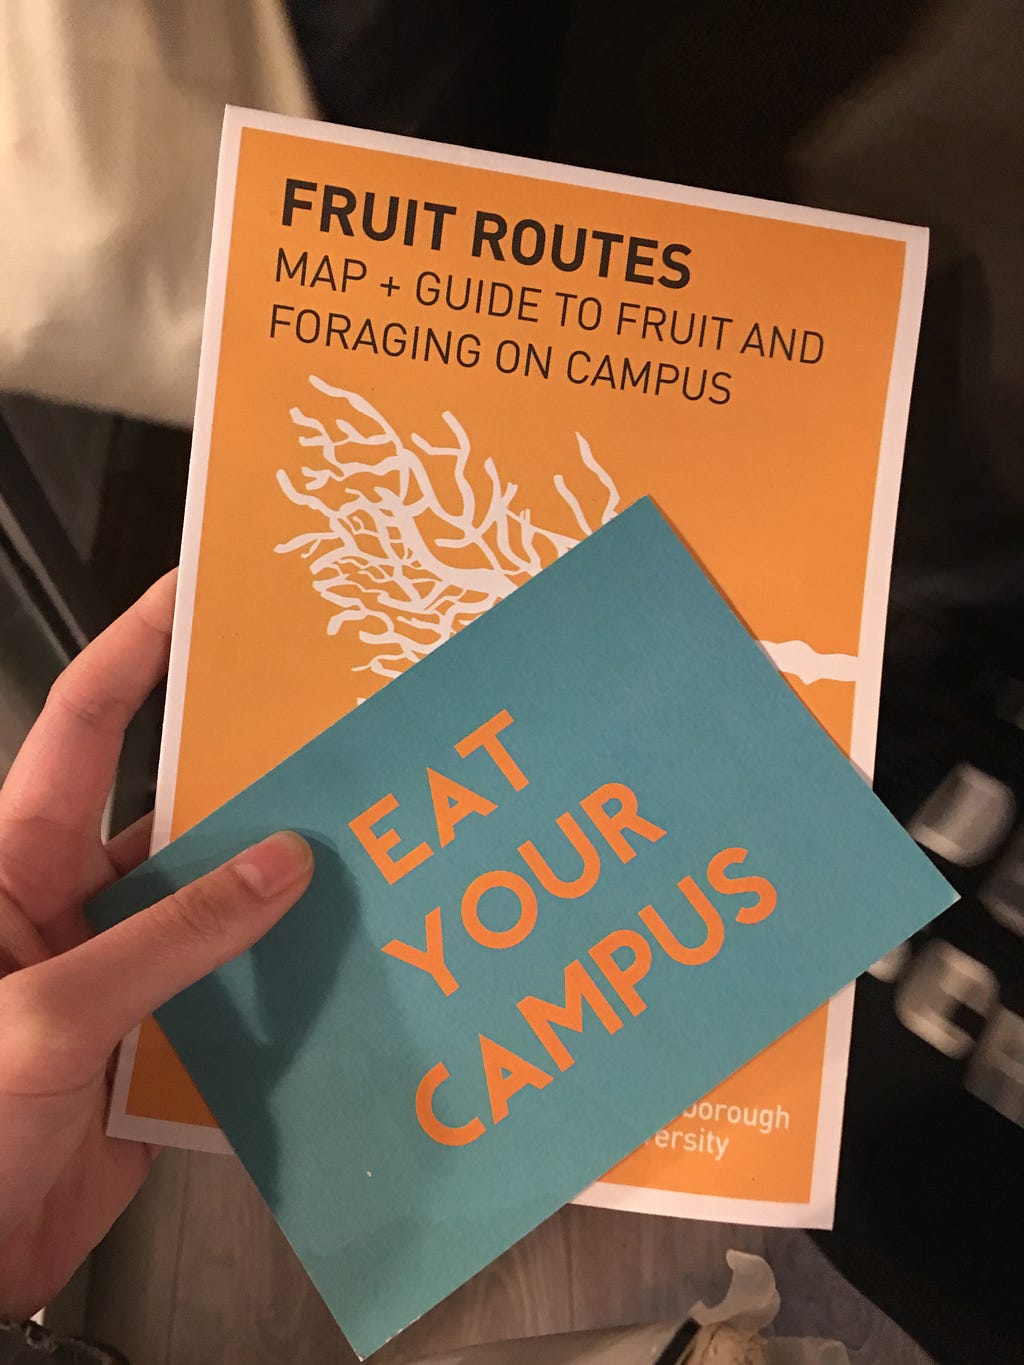 A post card which reads “Eat your Campus” and an informational guide with map booklet about Fruit Routes.